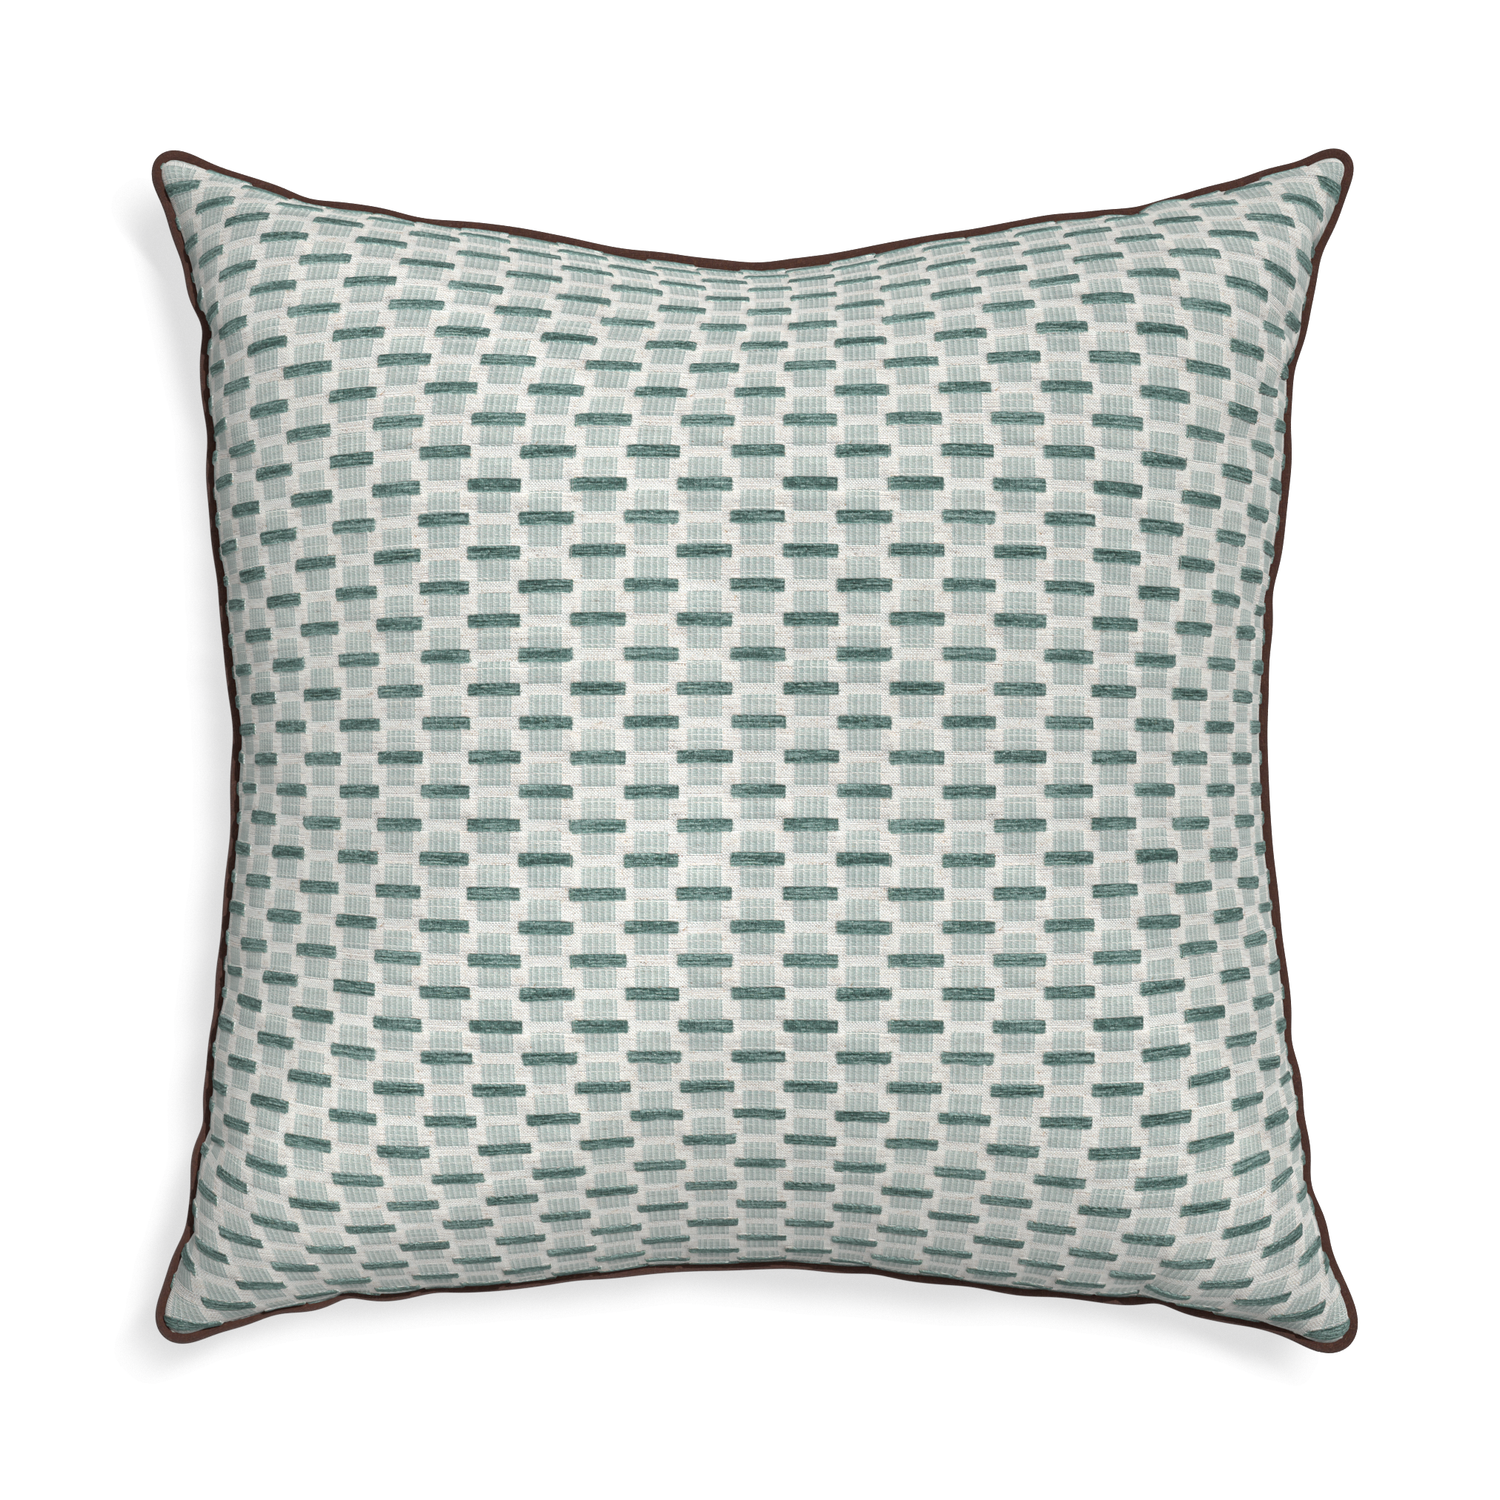 Euro-sham willow mint custom green geometric chenillepillow with w piping on white background